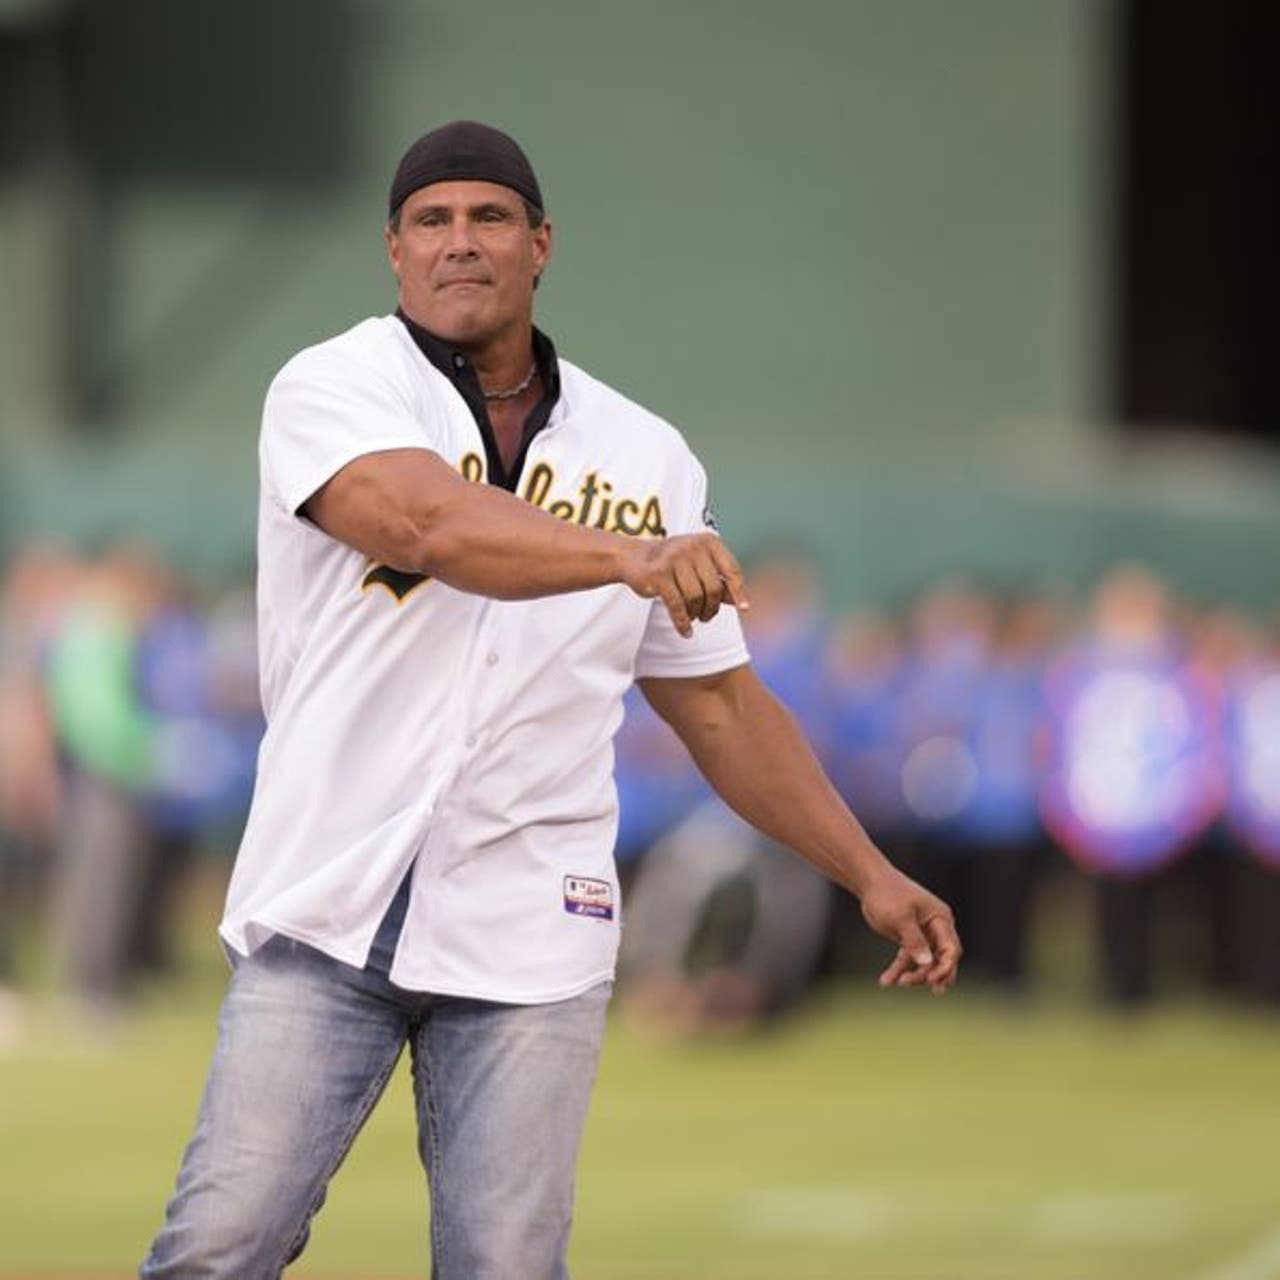 Jose Canseco: At the Very Least, He's Refreshingly Honest